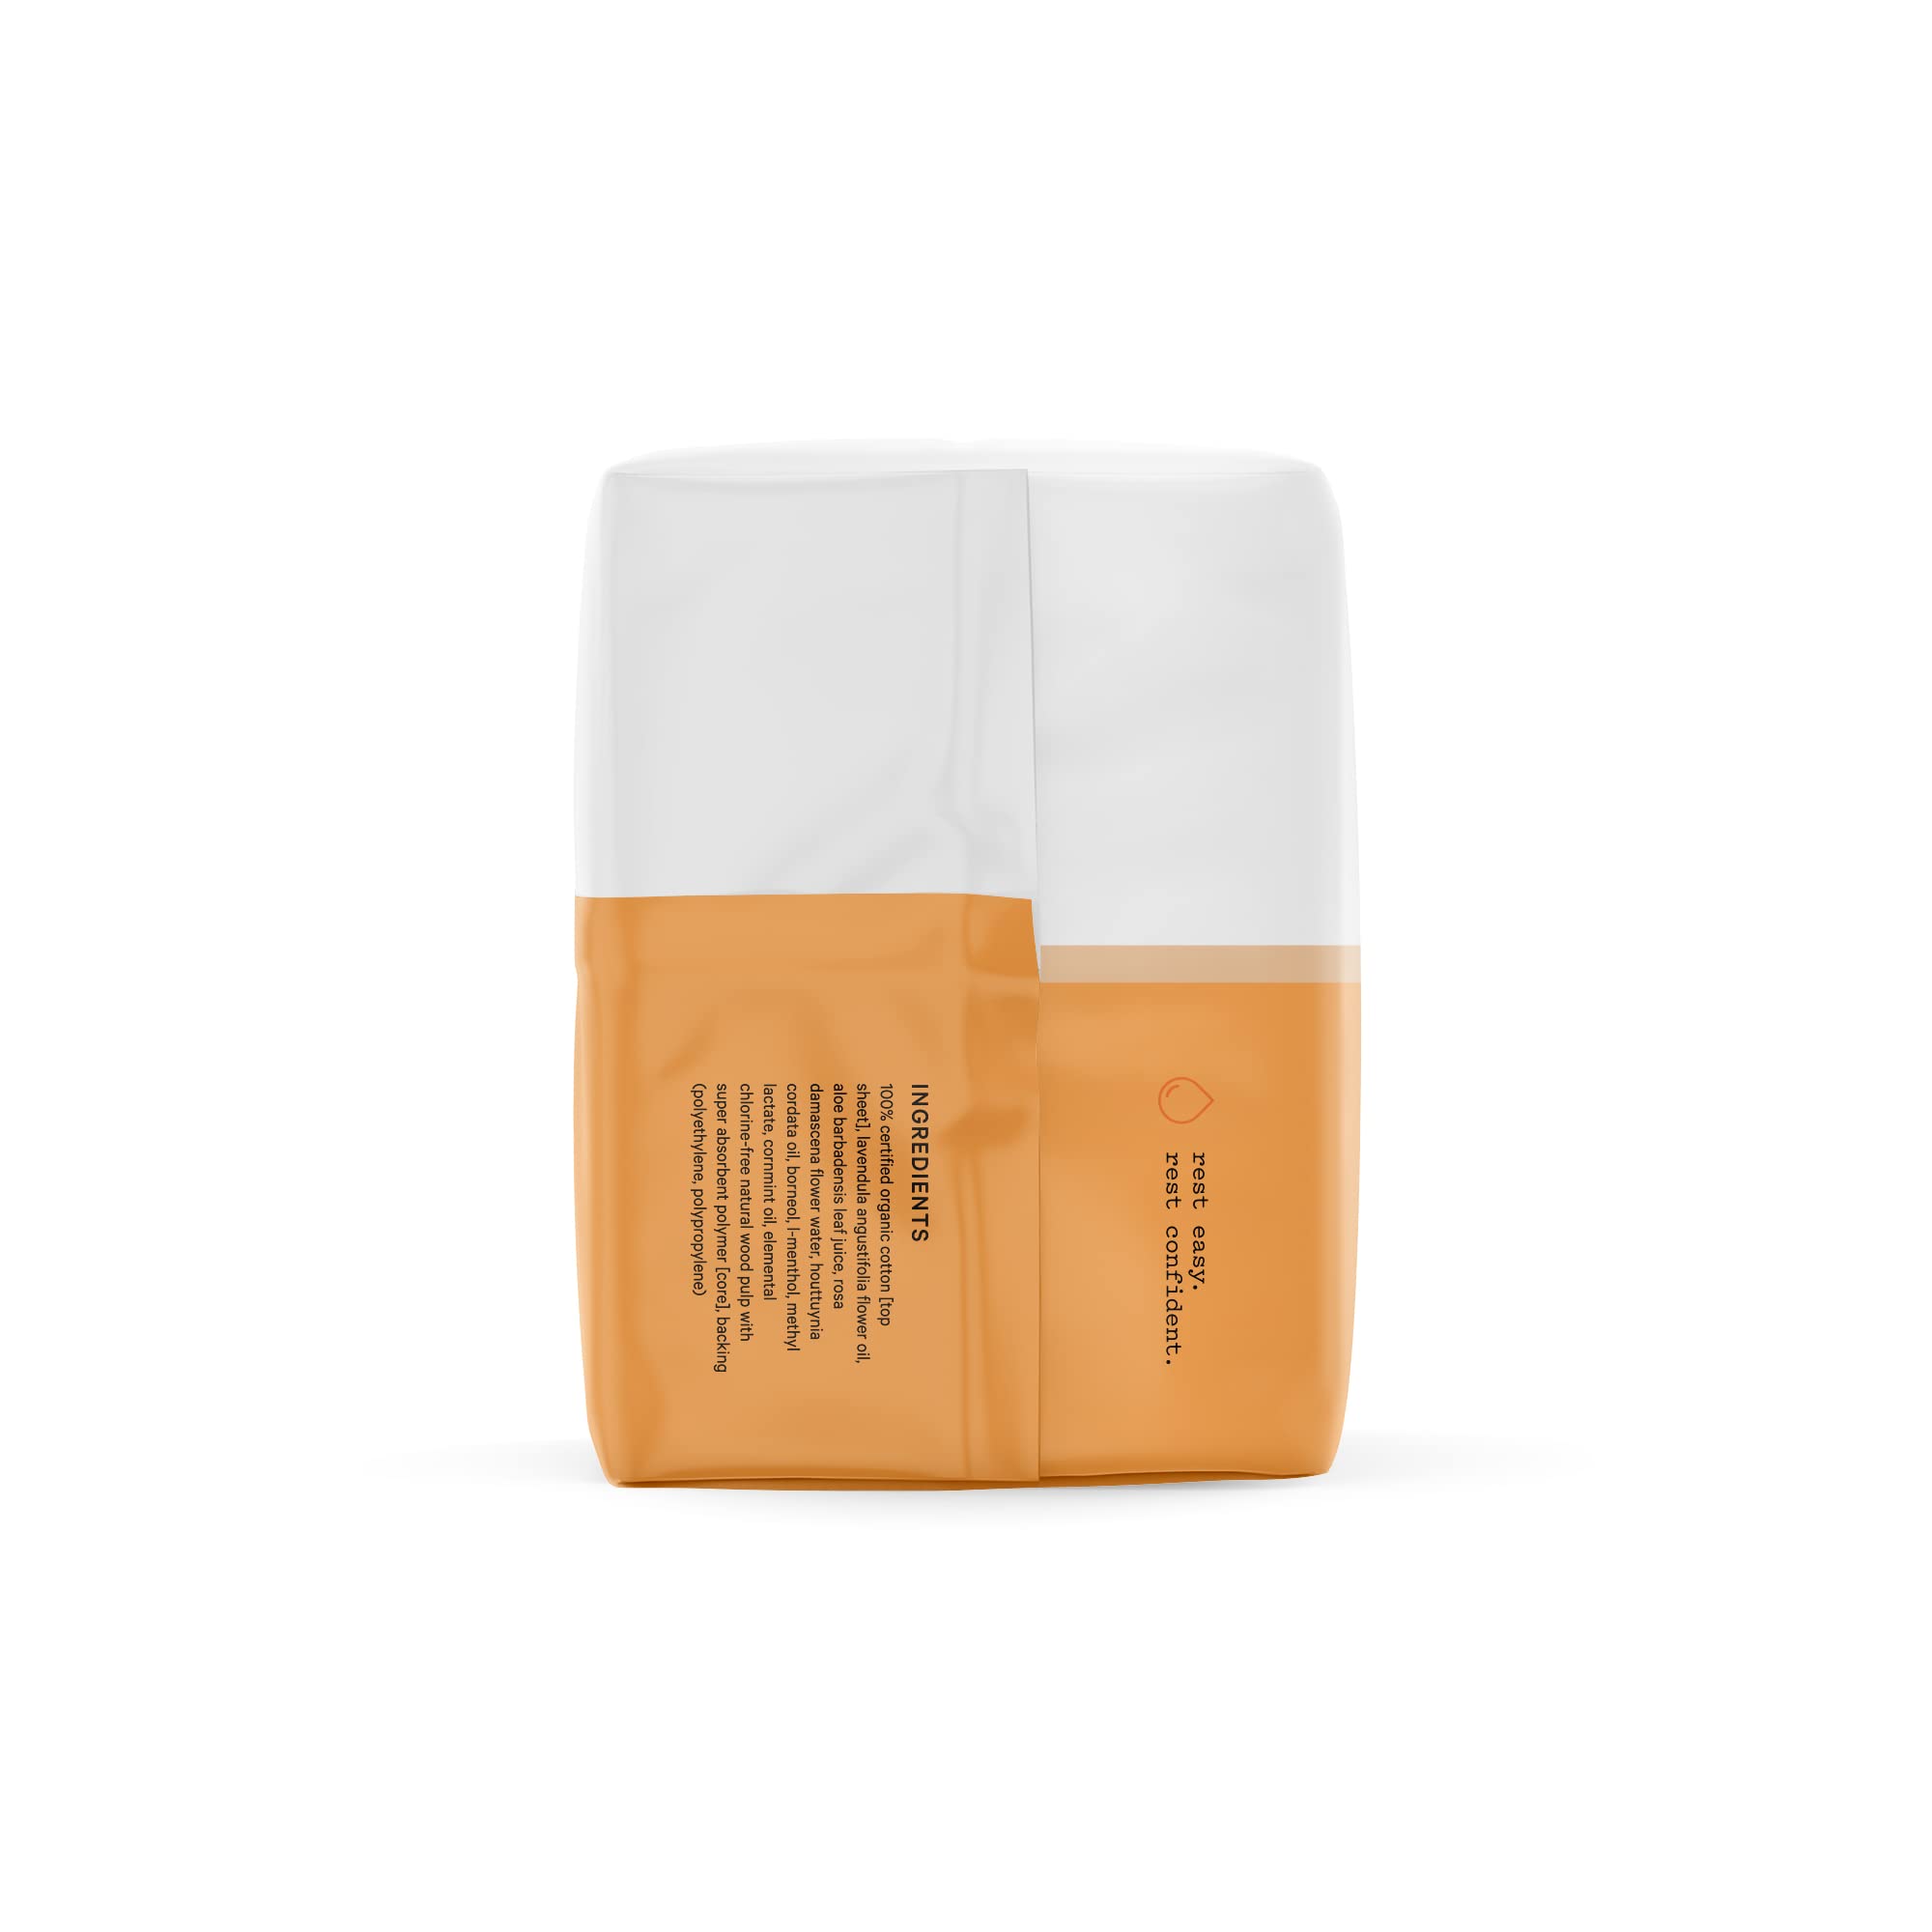 The Honey Pot Company - Overnight Heavy Flow Pads with Wings. Infused w/Essential Oils for Cooling Effect, Organic Cotton Cover, and Ultra-Absorbent Pulp Core. 20 ct.